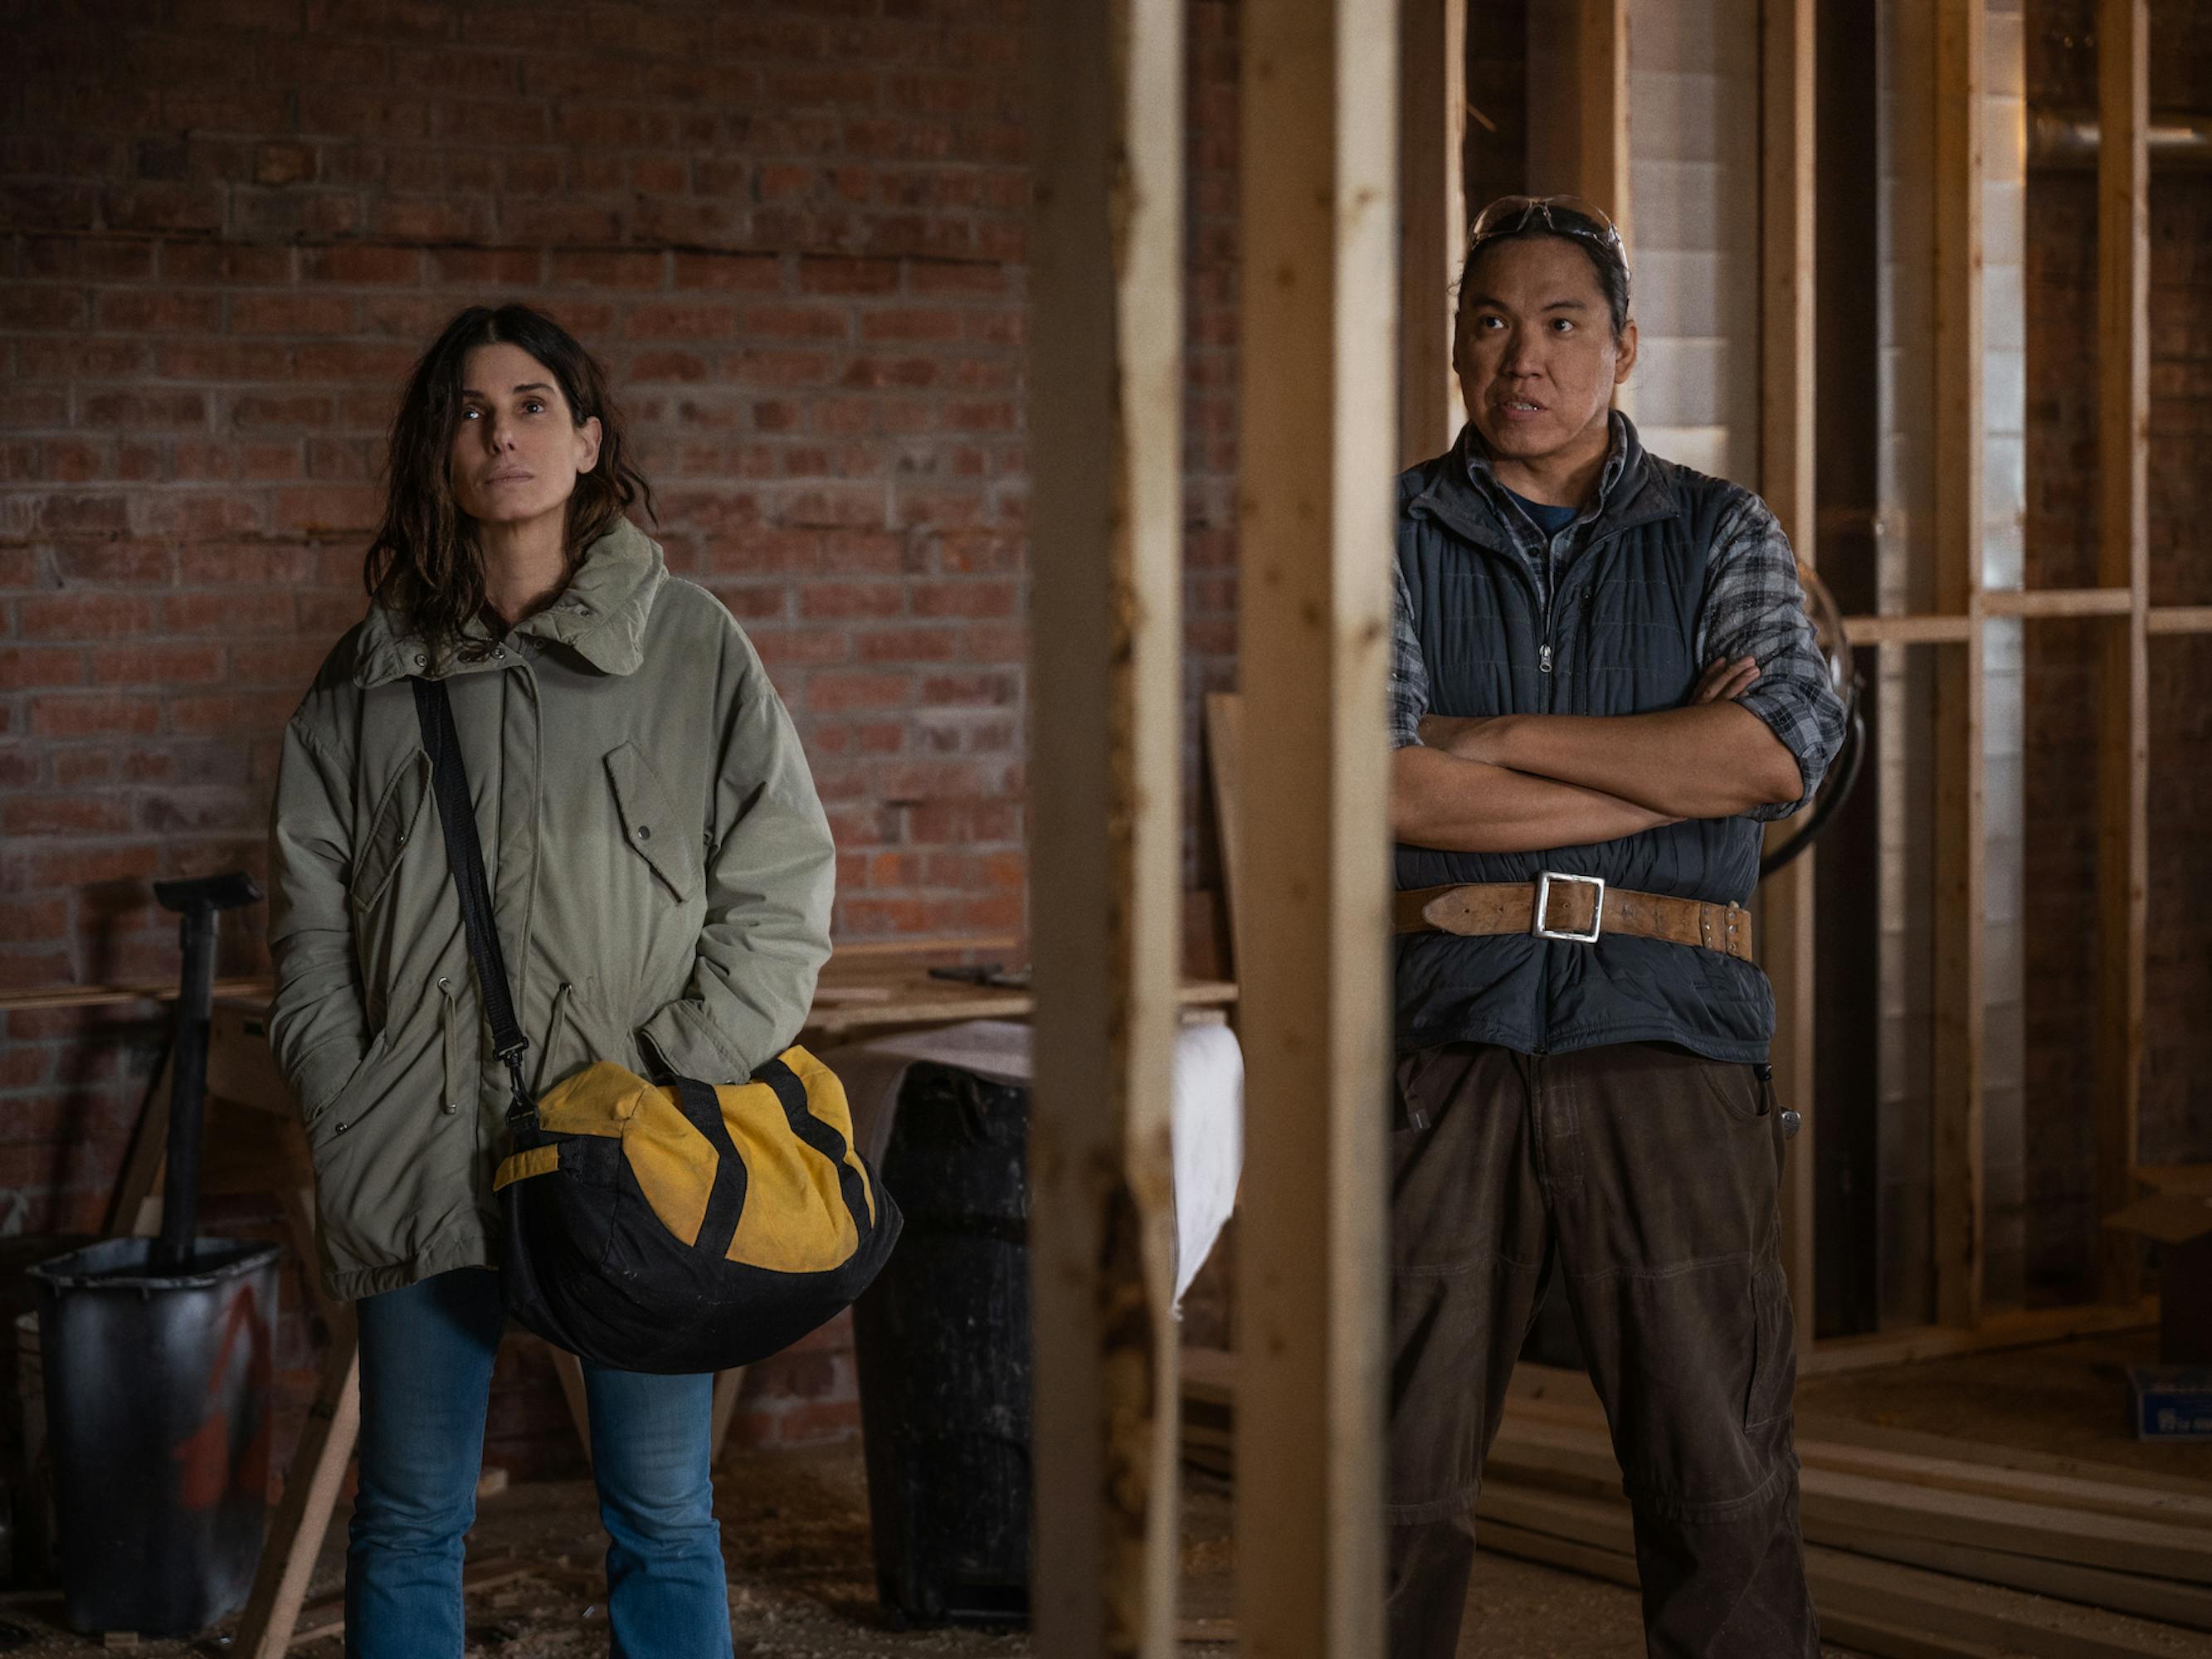 Ruth Slater (Sandra Bullock) and a fellow carpenter assess an empty room. Bullock wears a light green jacket and blue jeans, carrying a yellow duffel. The carpenter wears a checkered shirt, navy vest, and brown pants. 